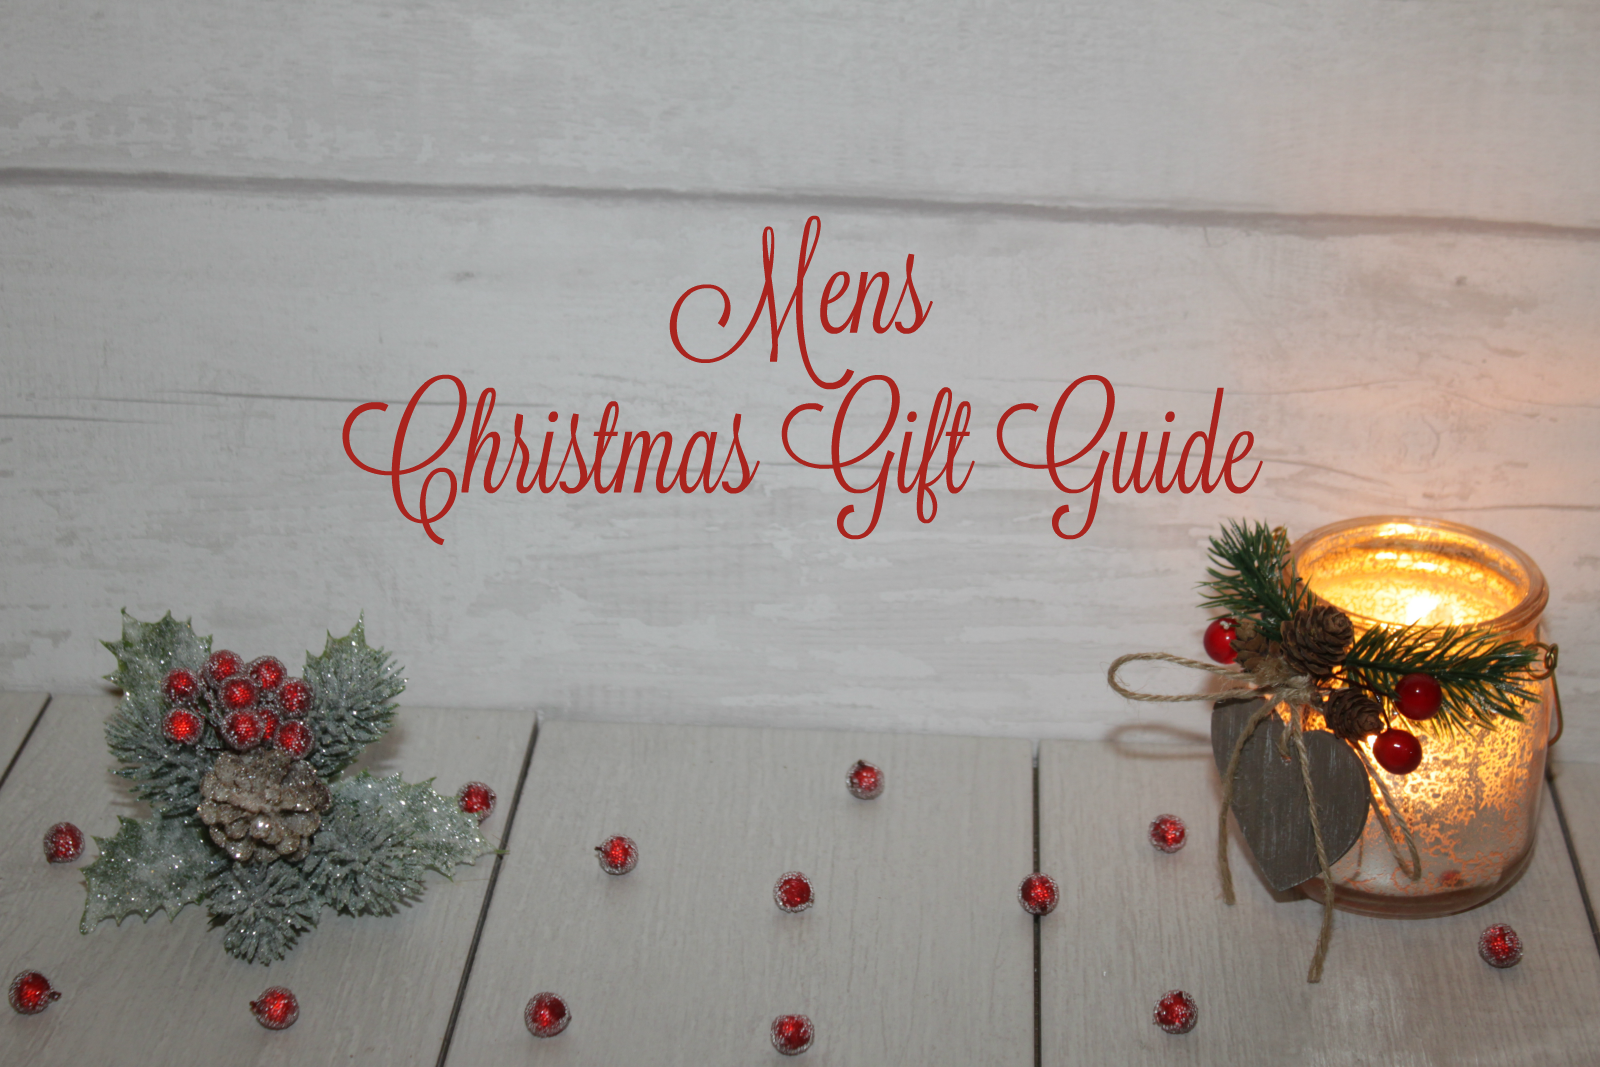 2018 Christmas Gift Guide - For Him.